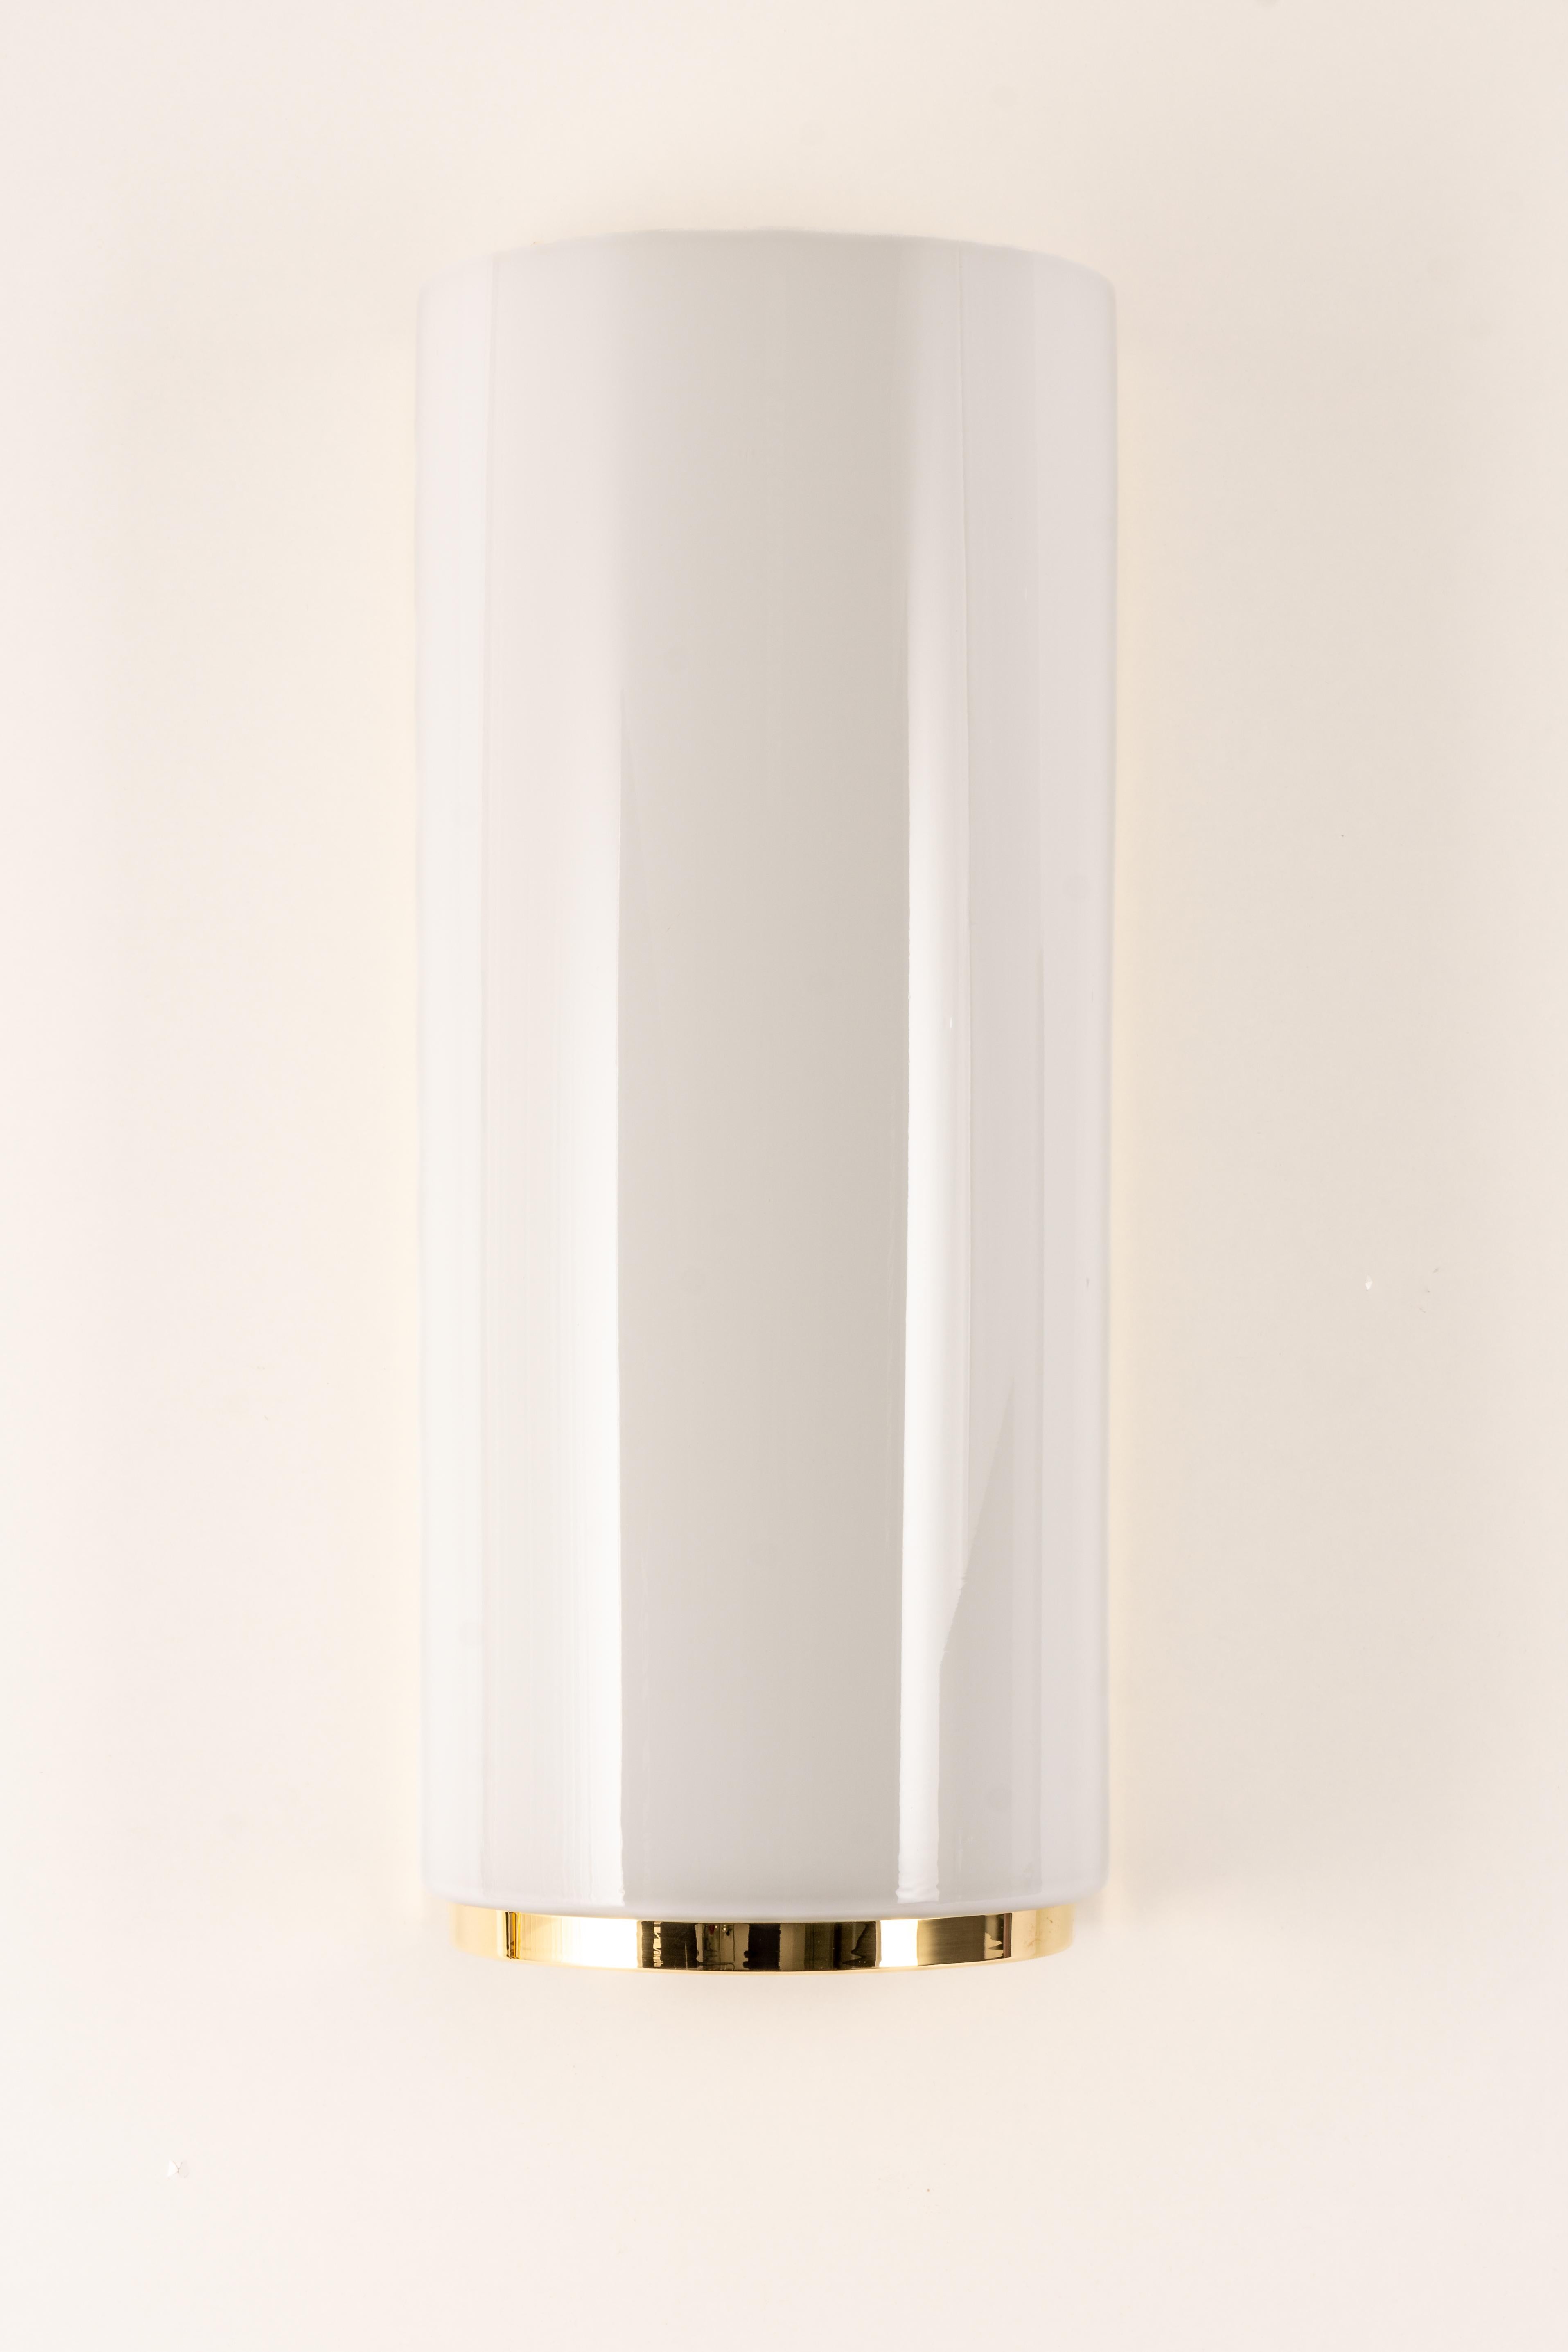 Stunning pair of opal white glass sconces made by Limburg on a brass frame.
Best of the 1970s from Germany

Each Sconce takes 2 x E27 standard bulbs
Light bulbs are not included. It is possible to install this fixture in all countries (US, UK,